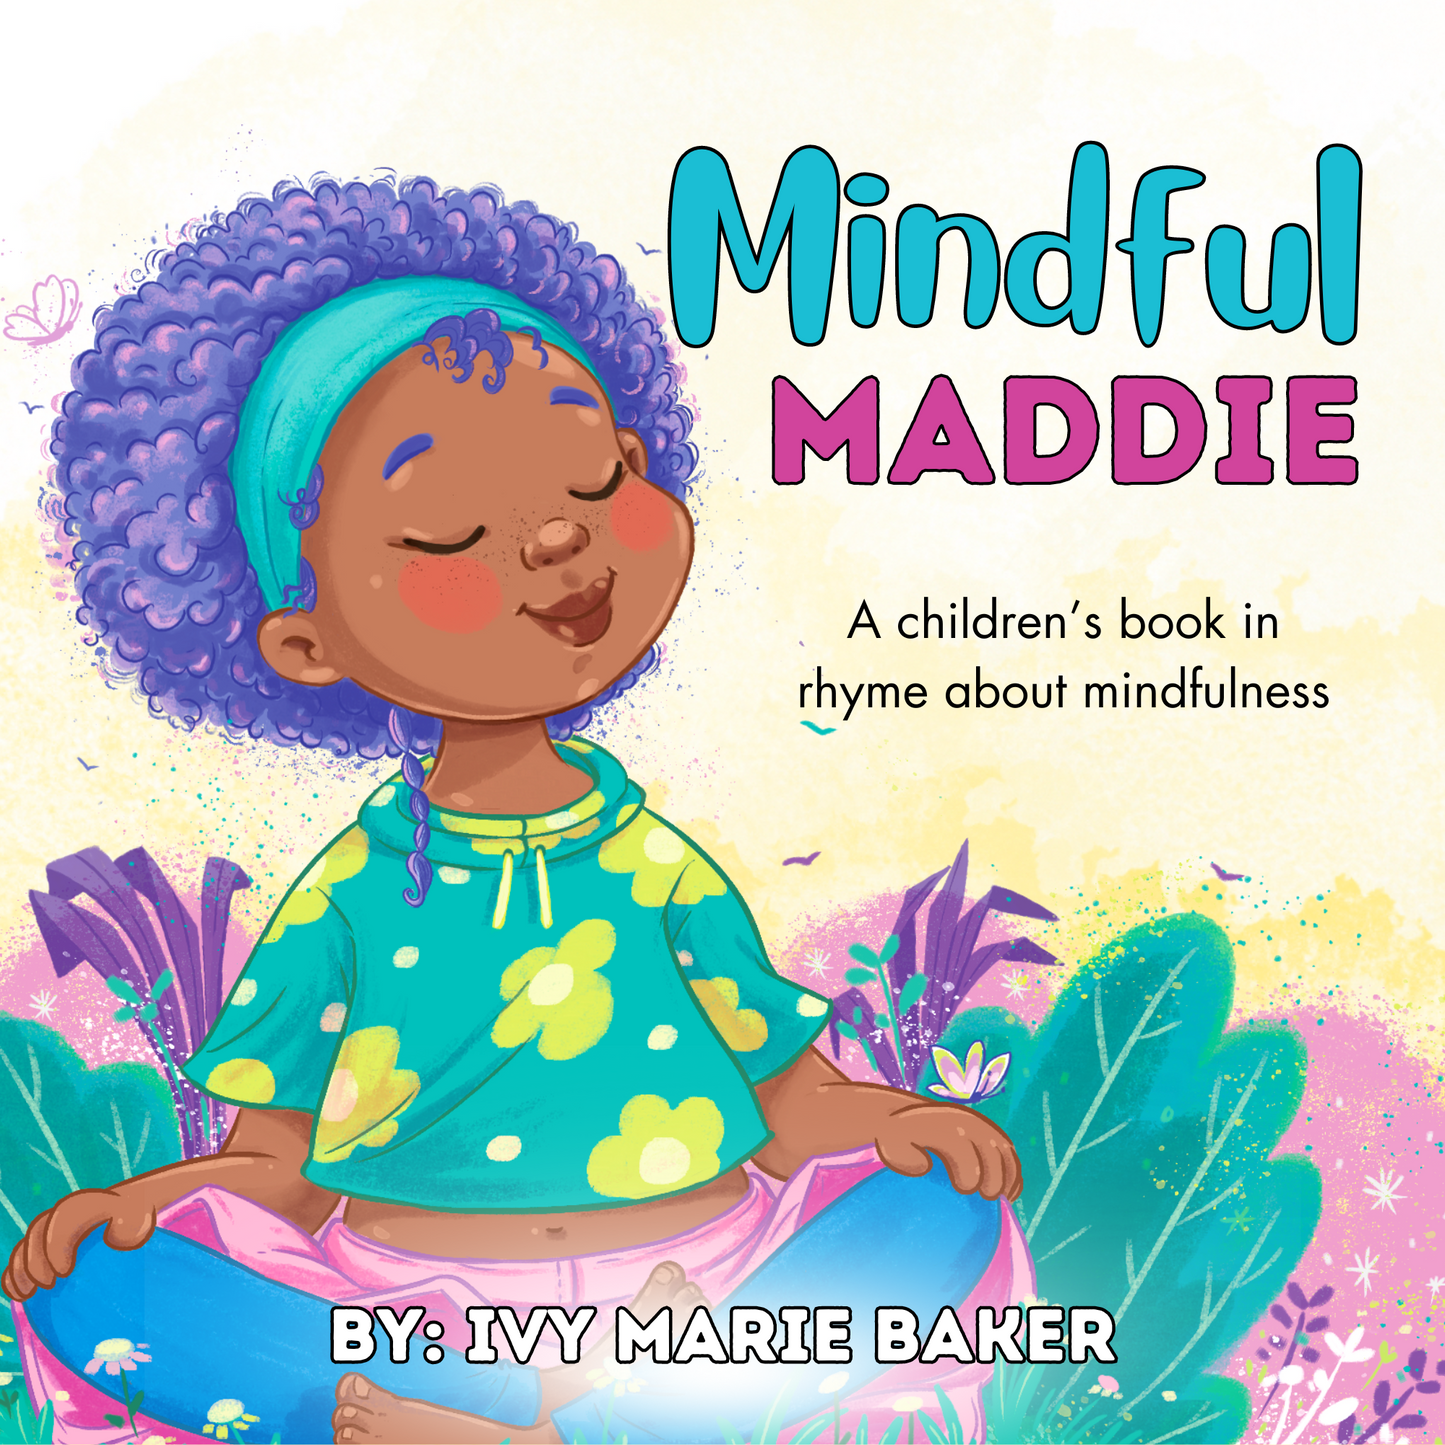 Mindful Maddie Children's Book by Ivy Marie Baker